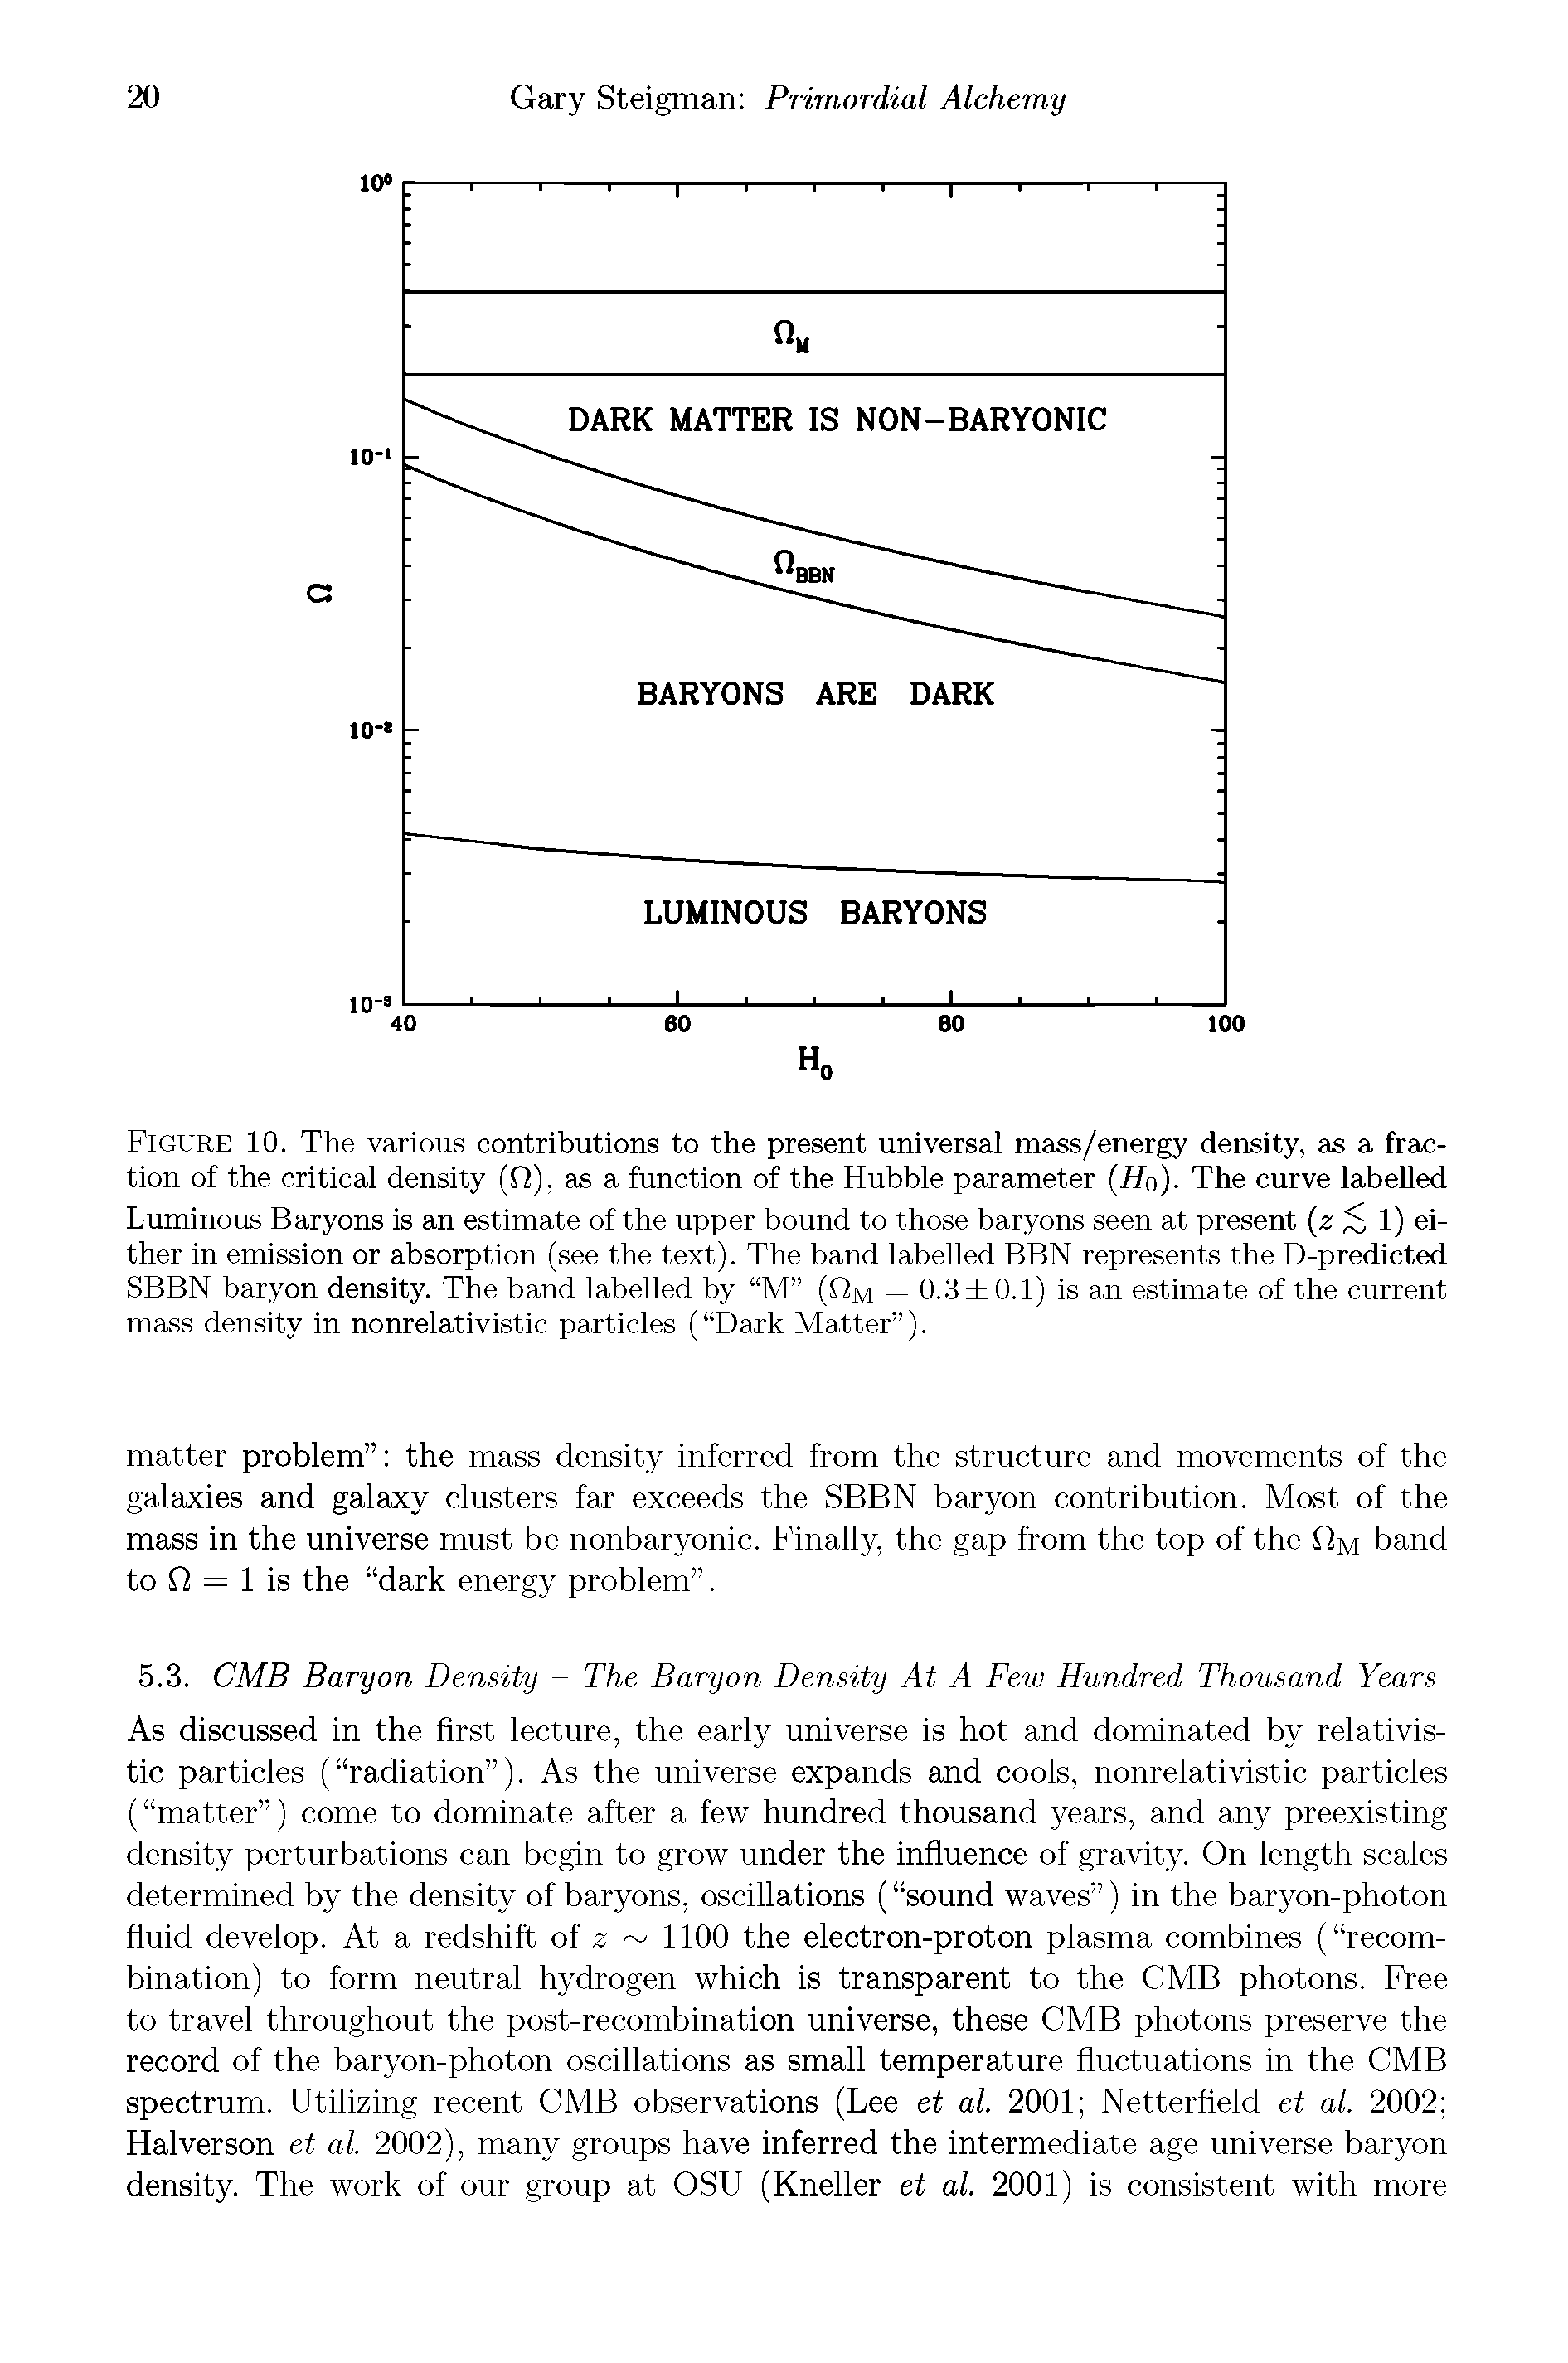 Figure 10. The various contributions to the present universal mass/energy density, as a fraction of the critical density (Q), as a function of the Hubble parameter (Ho). The curve labelled Luminous Baryons is an estimate of the upper bound to those baryons seen at present (z ( 1) either in emission or absorption (see the text). The band labelled BBN represents the D-predicted SBBN baryon density. The band labelled by M (Om = 0.3 0.1) is an estimate of the current mass density in nonrelativistic particles ( Dark Matter ).